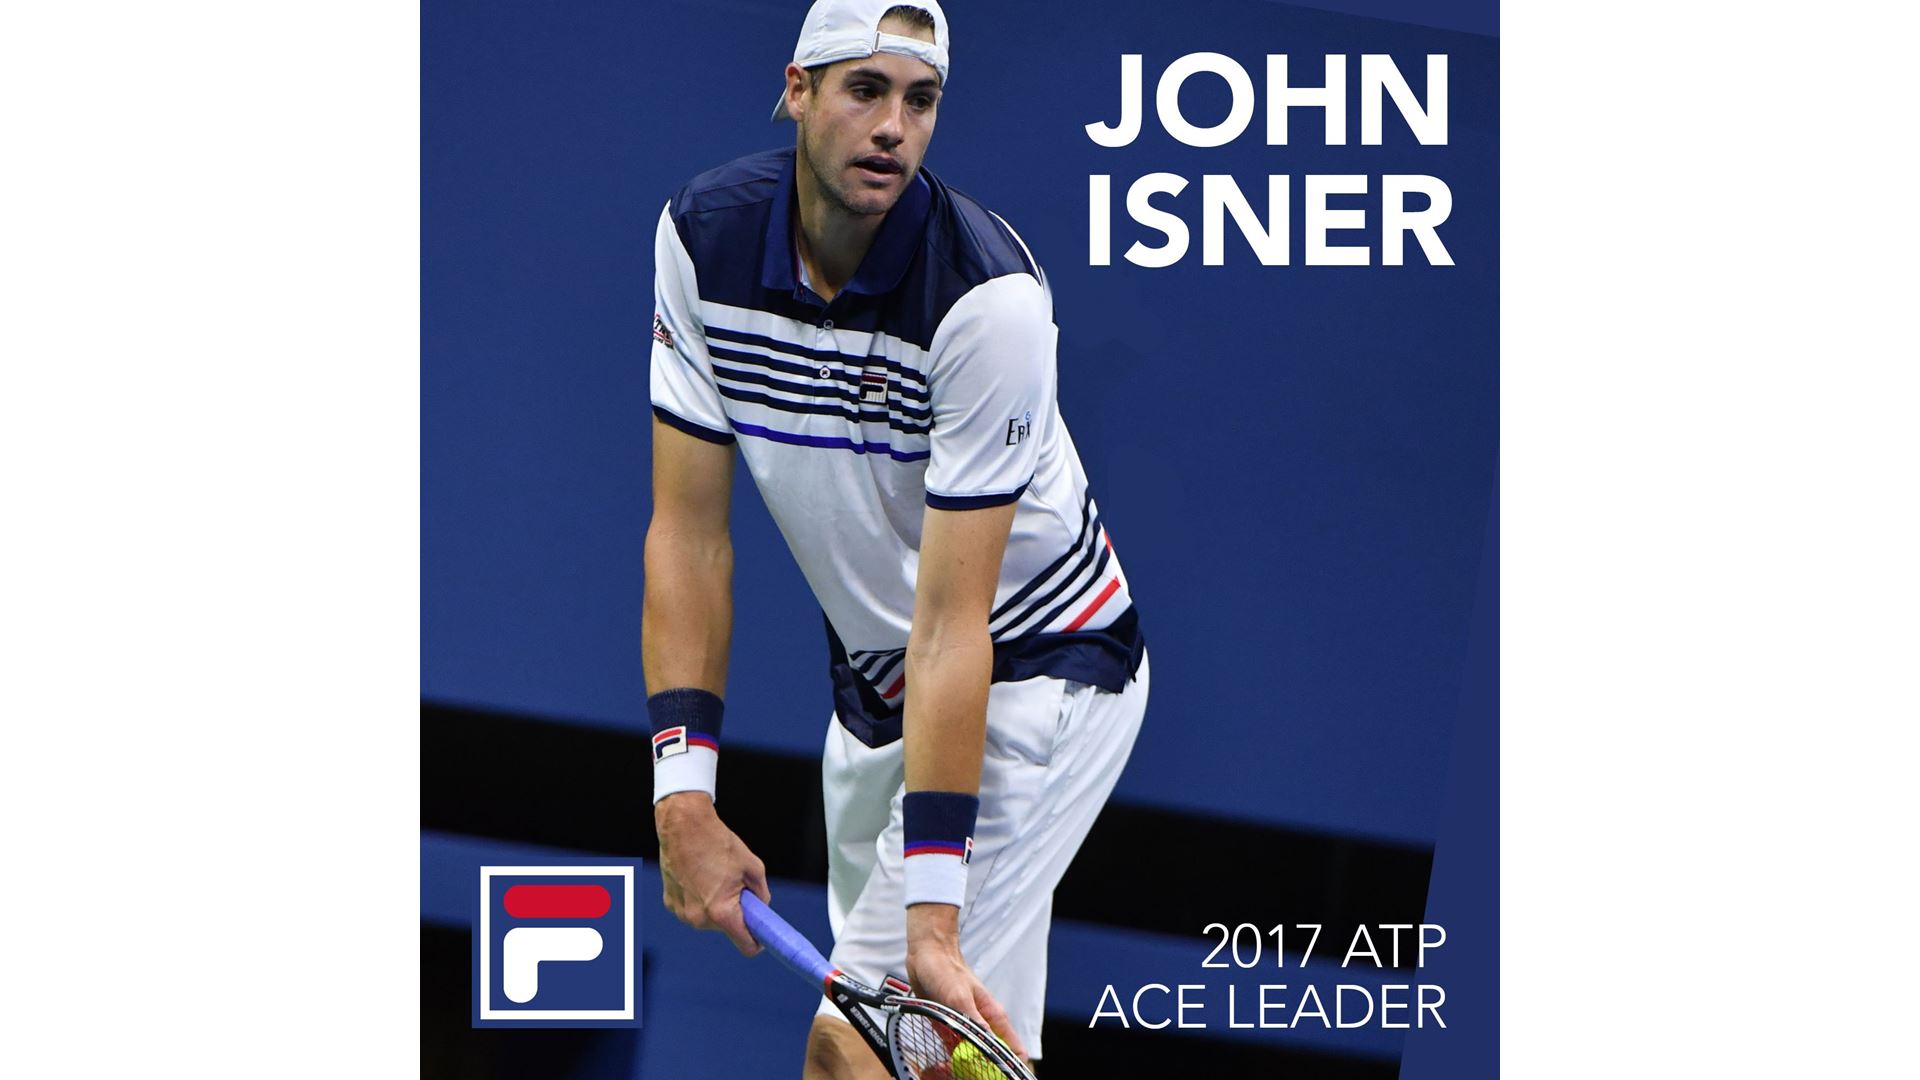 FILA tennis player John Isner has finished the 2017 season with the most aces on the ATP World Tour